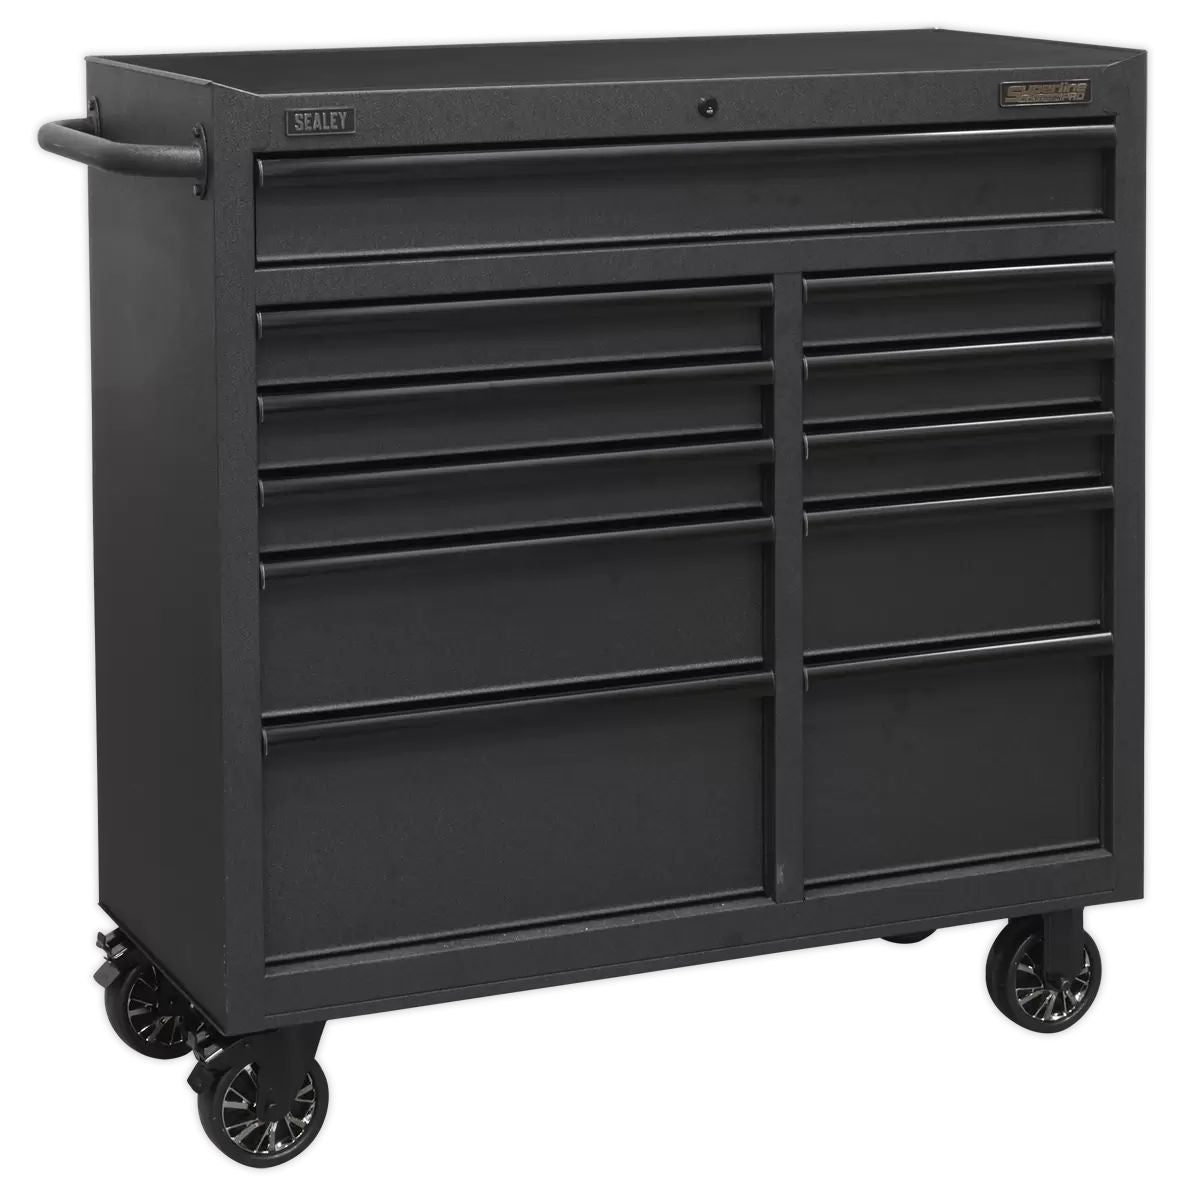 Sealey AP41BESTACK 17 Drawer Tool Chest Combination Soft Close Drawers Power Bar